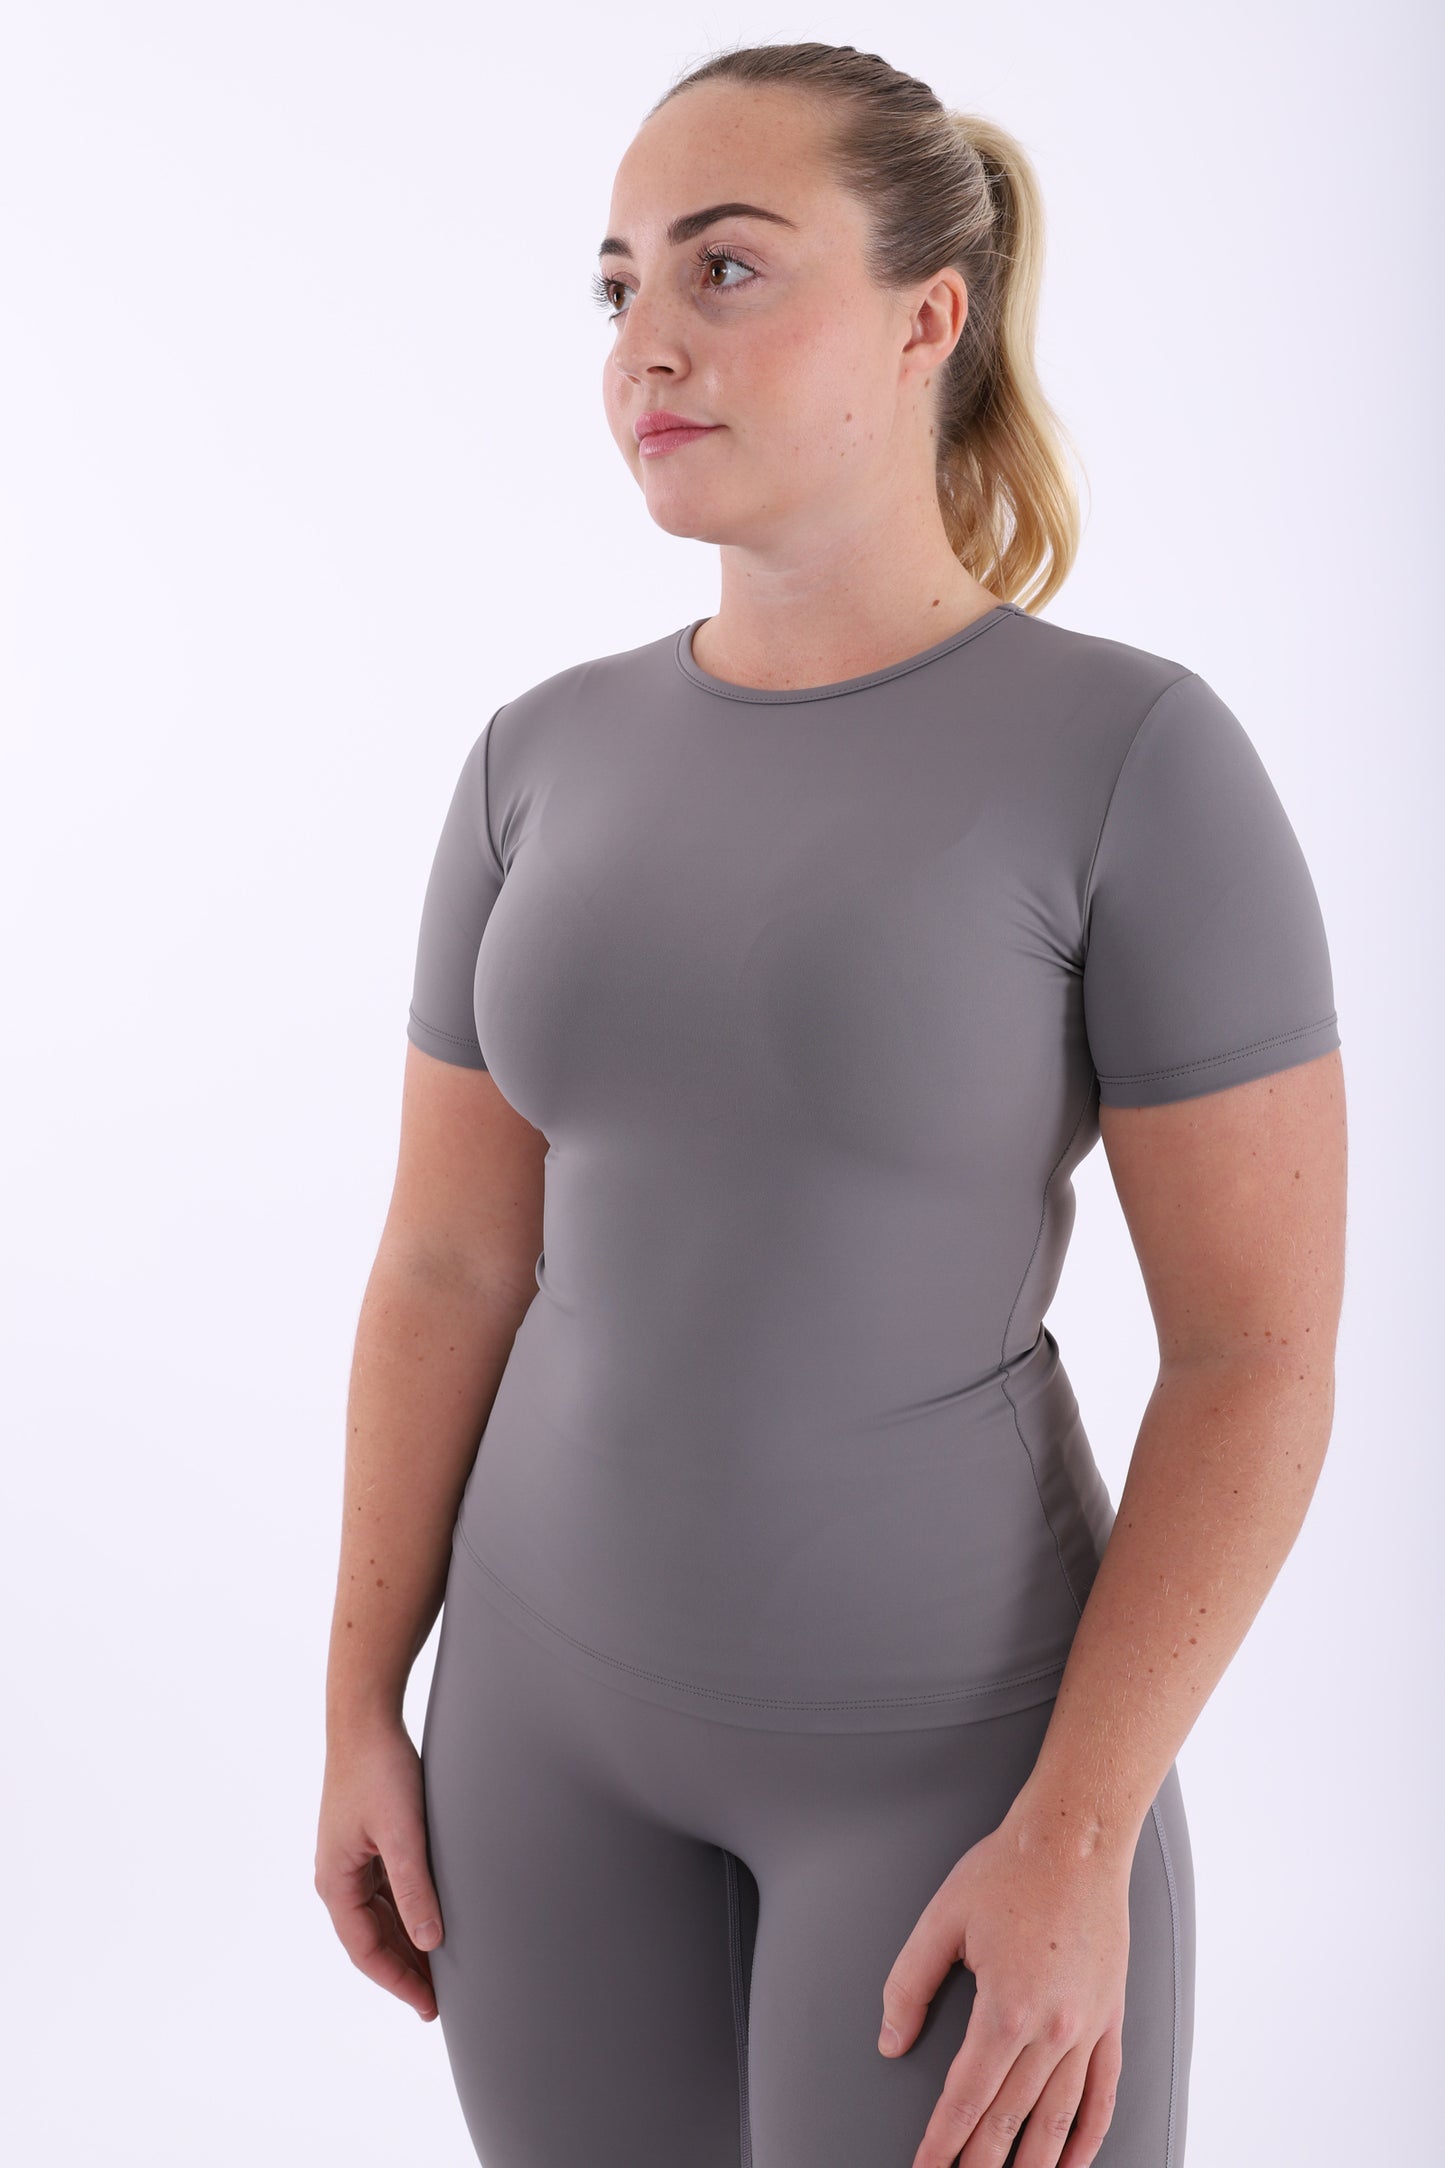 Charcoal grey smooth and sculpt top